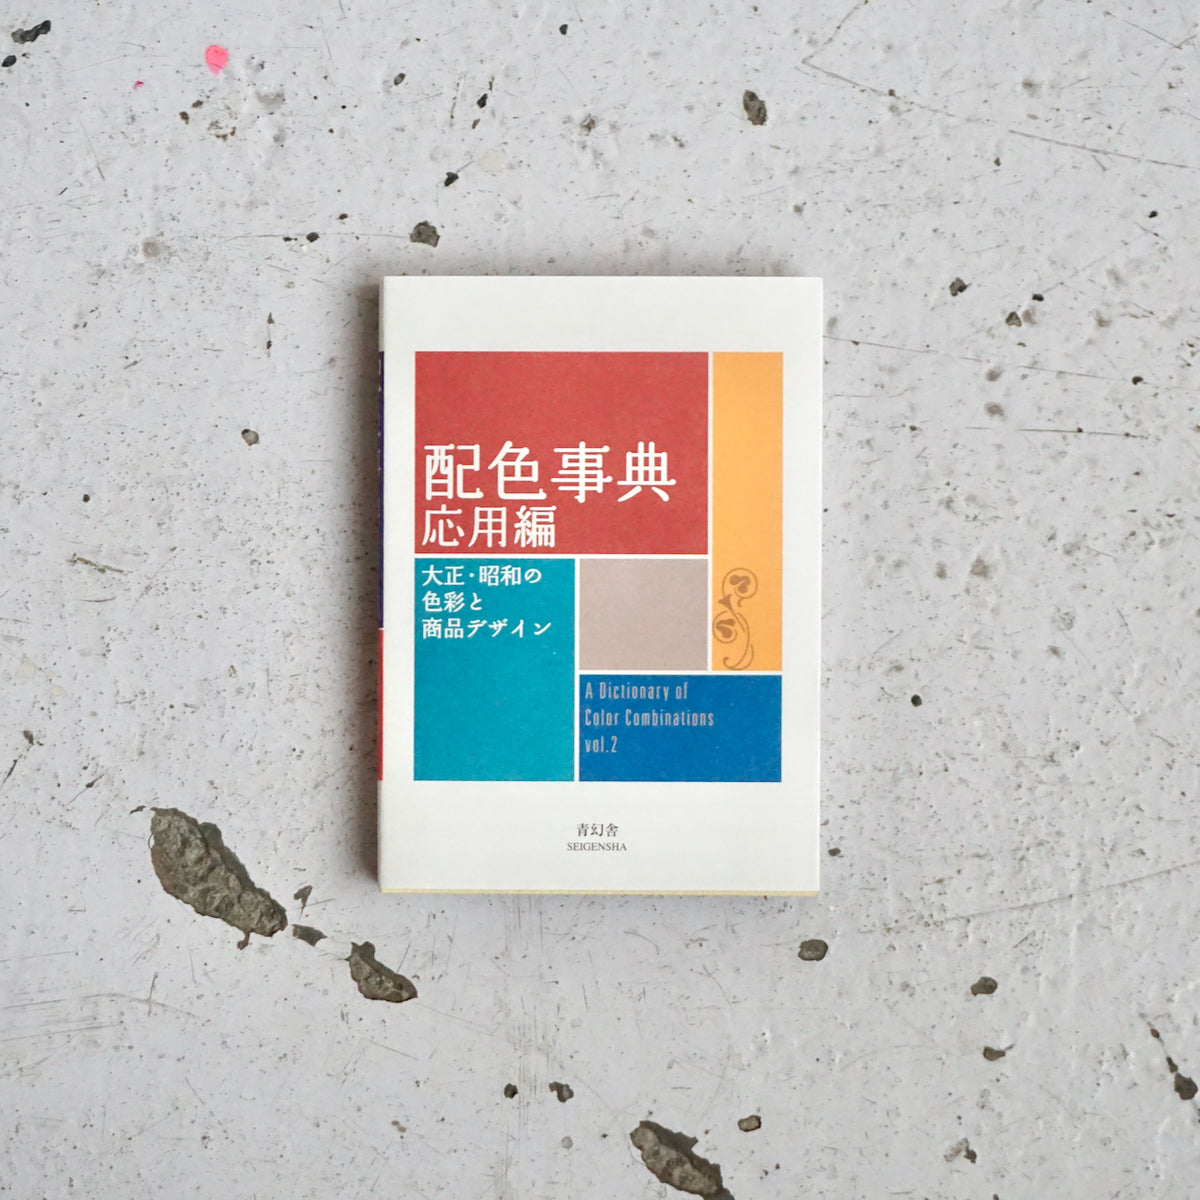 London Centre for Book Arts – A DICTIONARY OF COLOR COMBINATIONS VOL. 2  [配色辞典 応用編] by Sanzo Wada